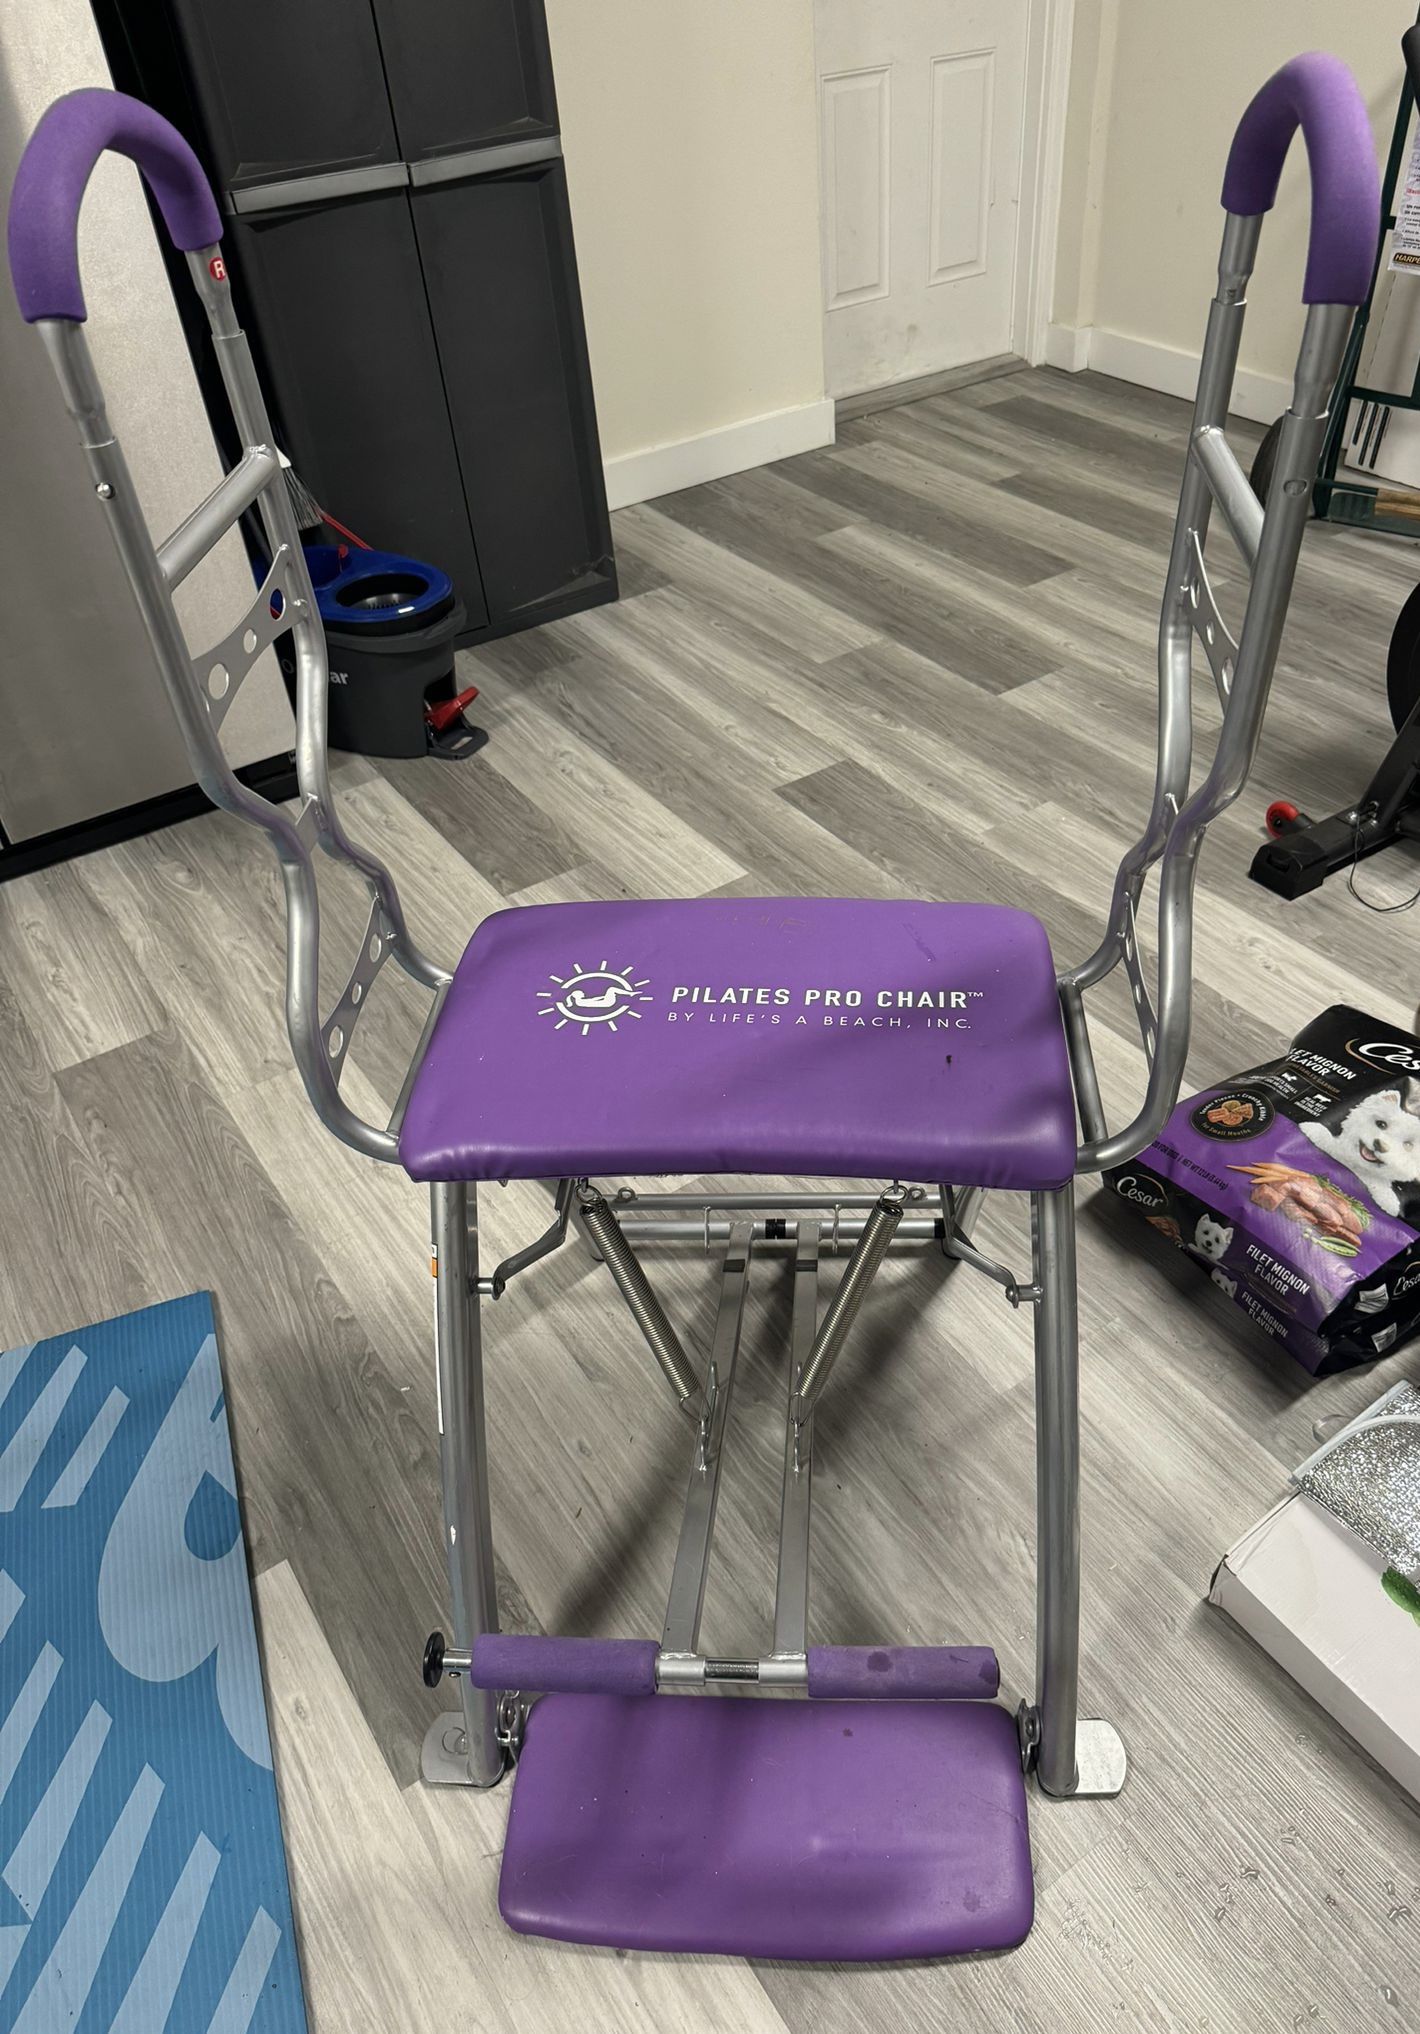 🔥 ……Pilates chair for sale $90 …..🔥